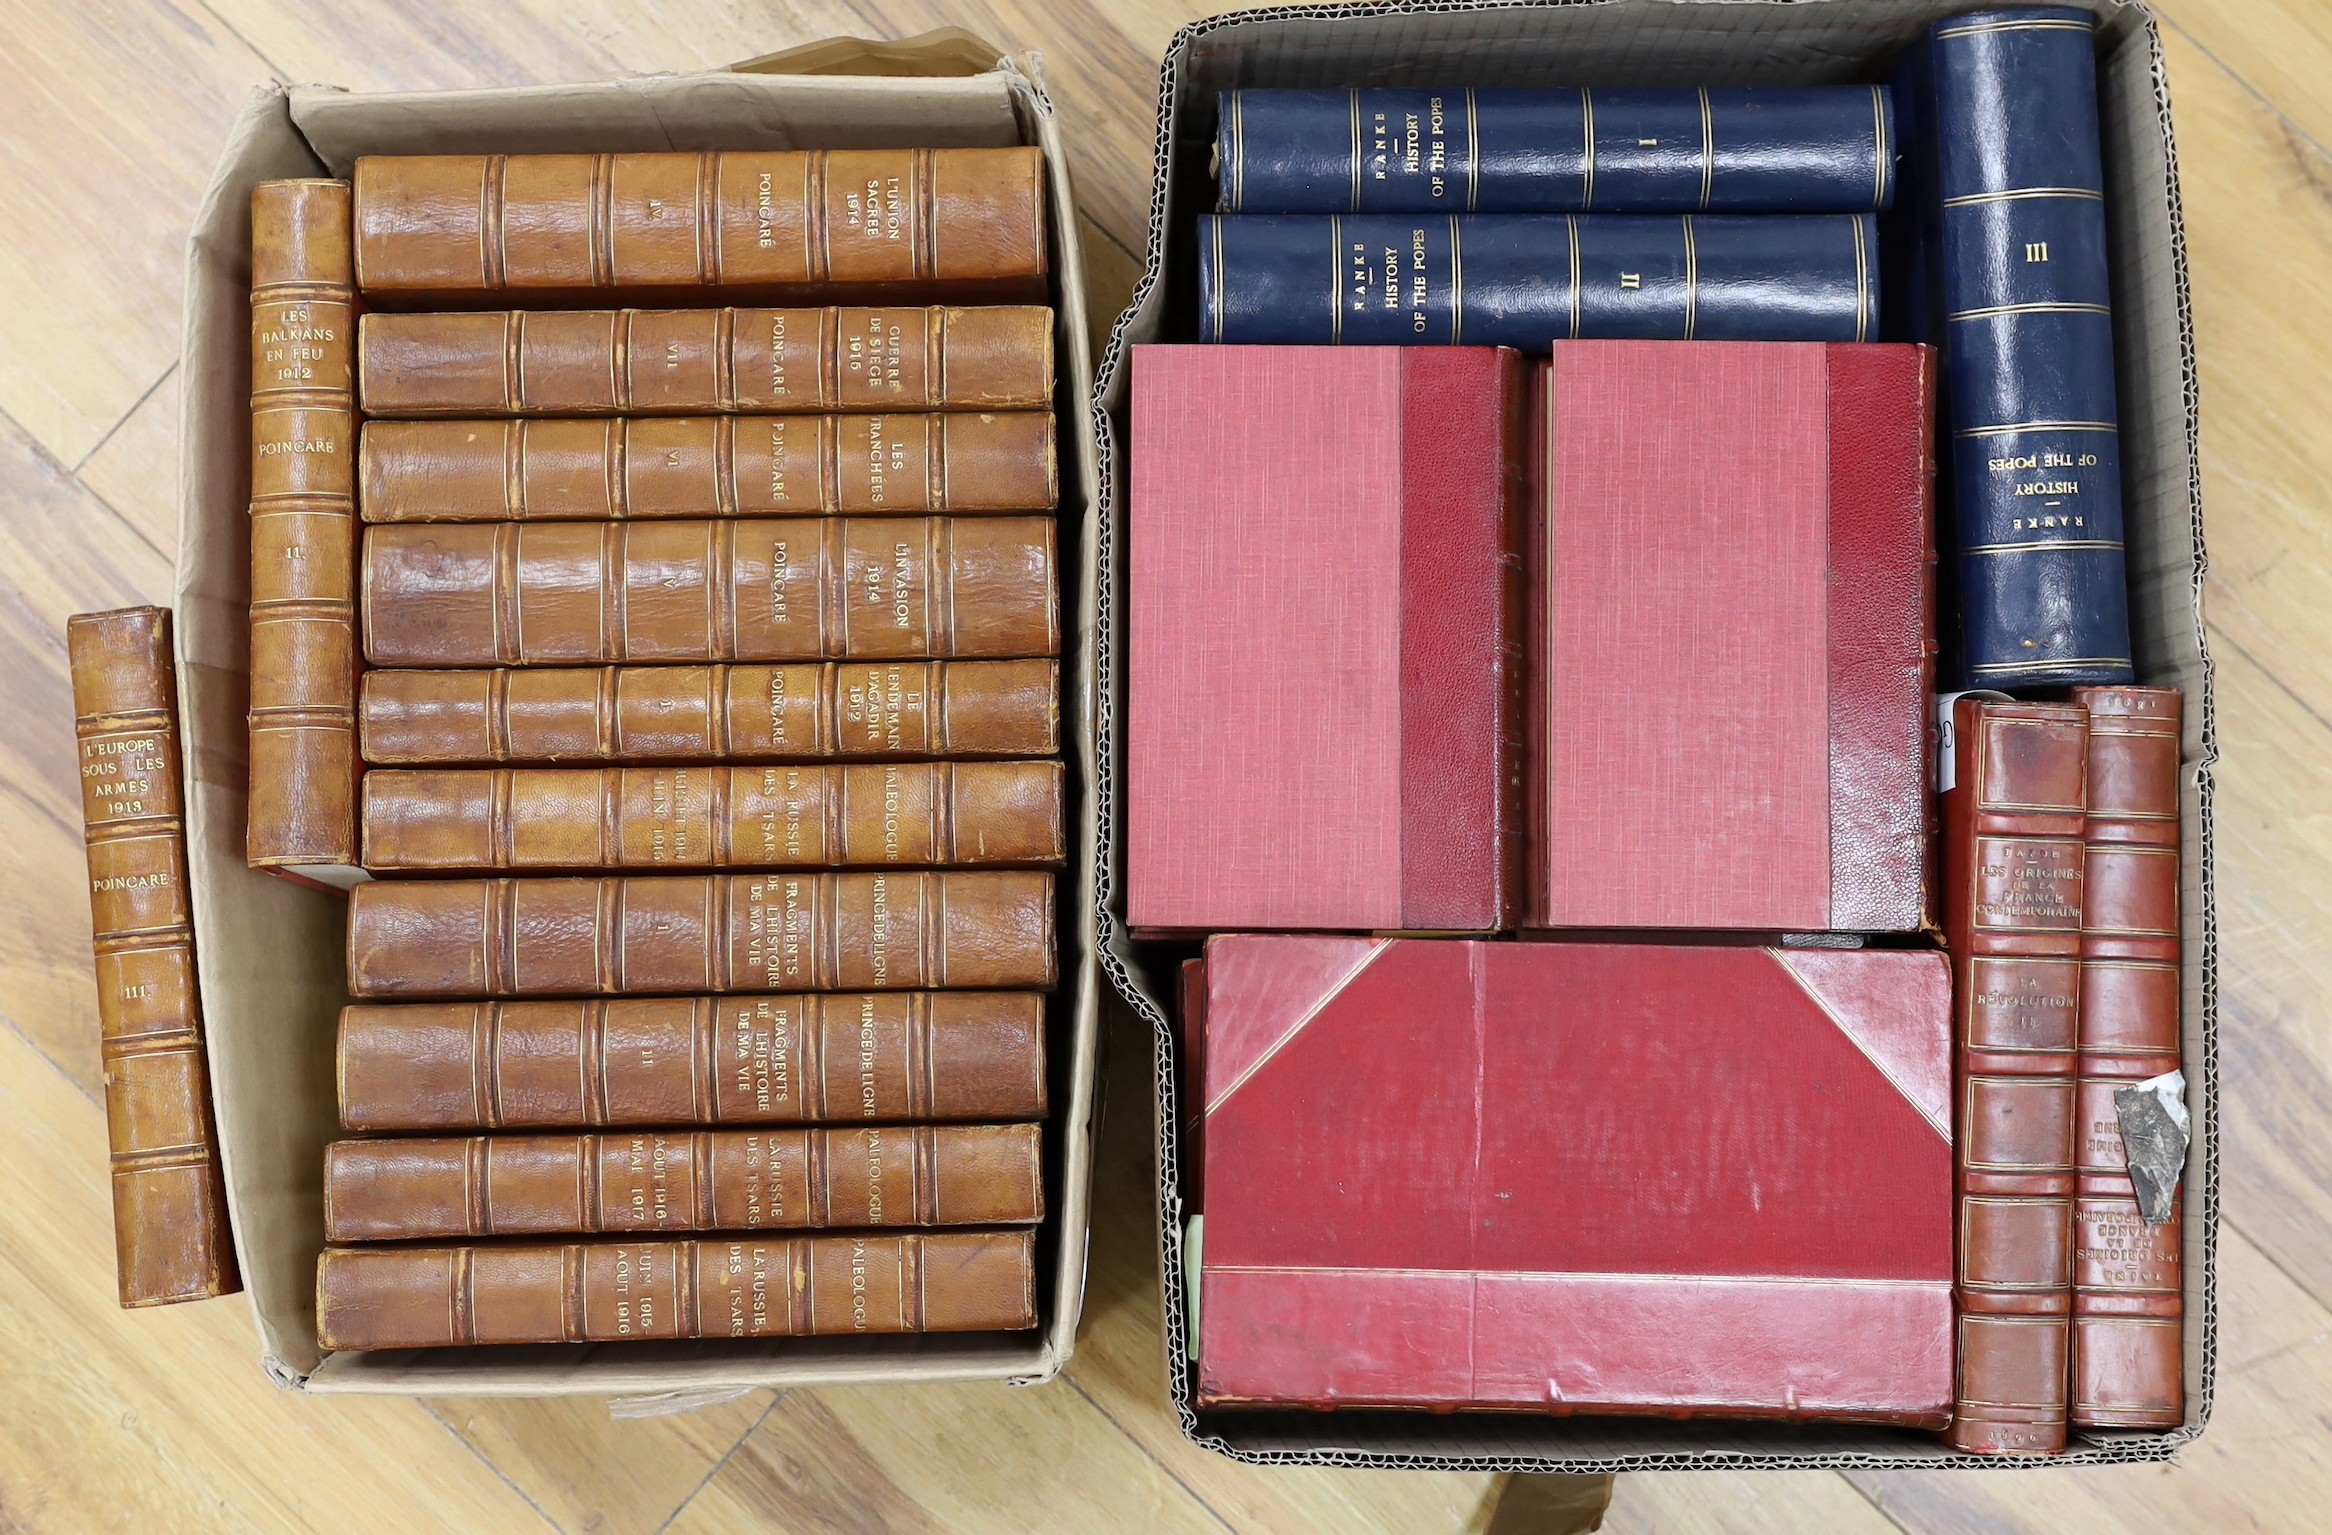 Ranke, Leopold - The Ecclesiastical and Political History of the Popes of Rome. 2nd edition, 3 vols. old calf backed cloth. 1841; Taine, H. Ouvrage Complet. 6 vols (various editions); contemp. red gilt ruled half calf an